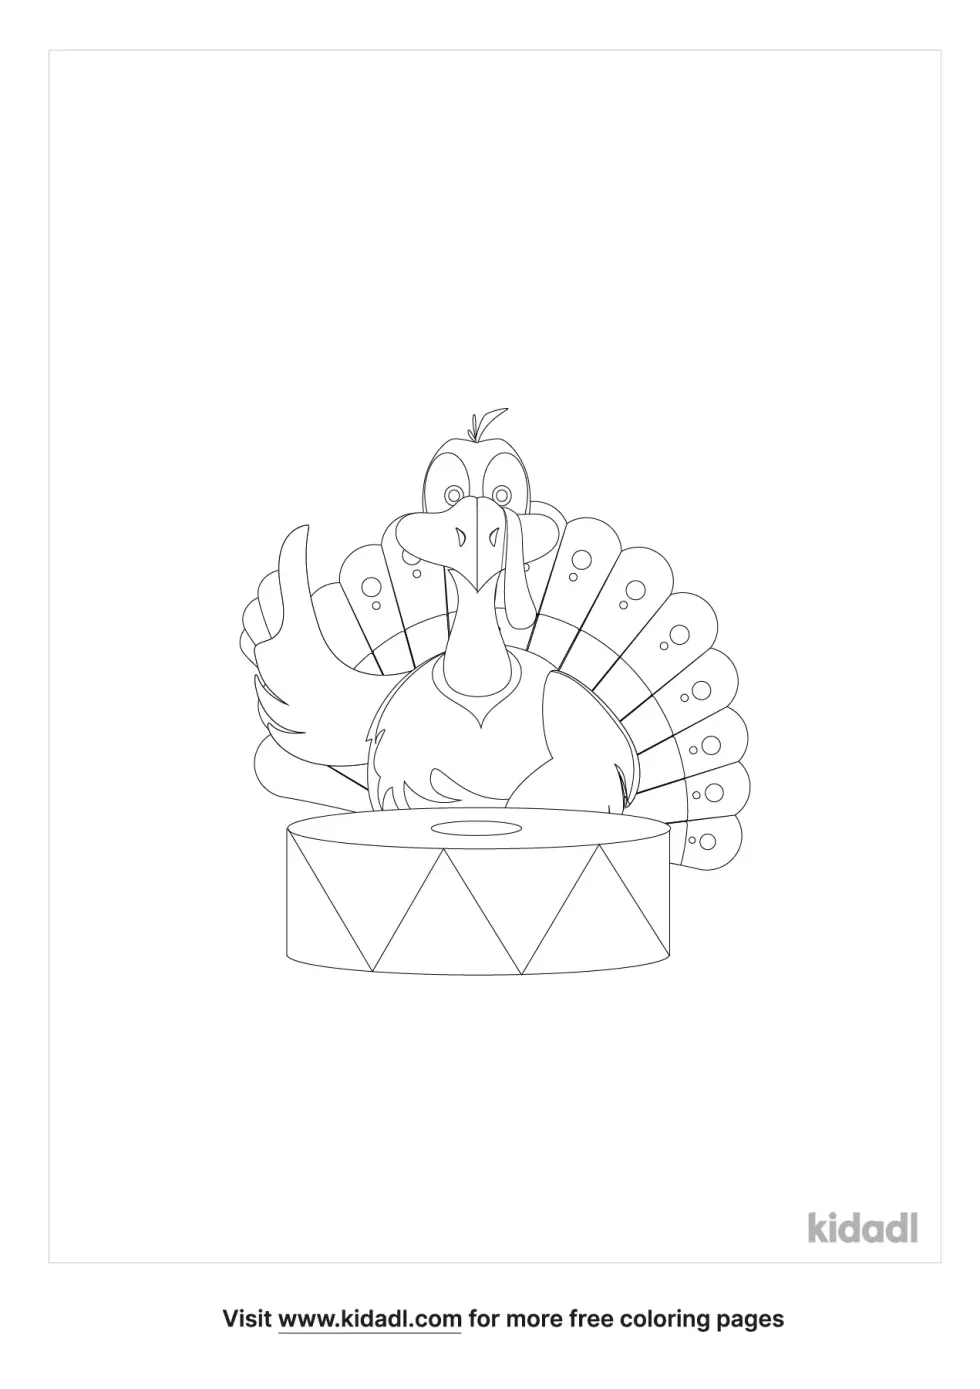 Turkey Playing Drums Coloring Page